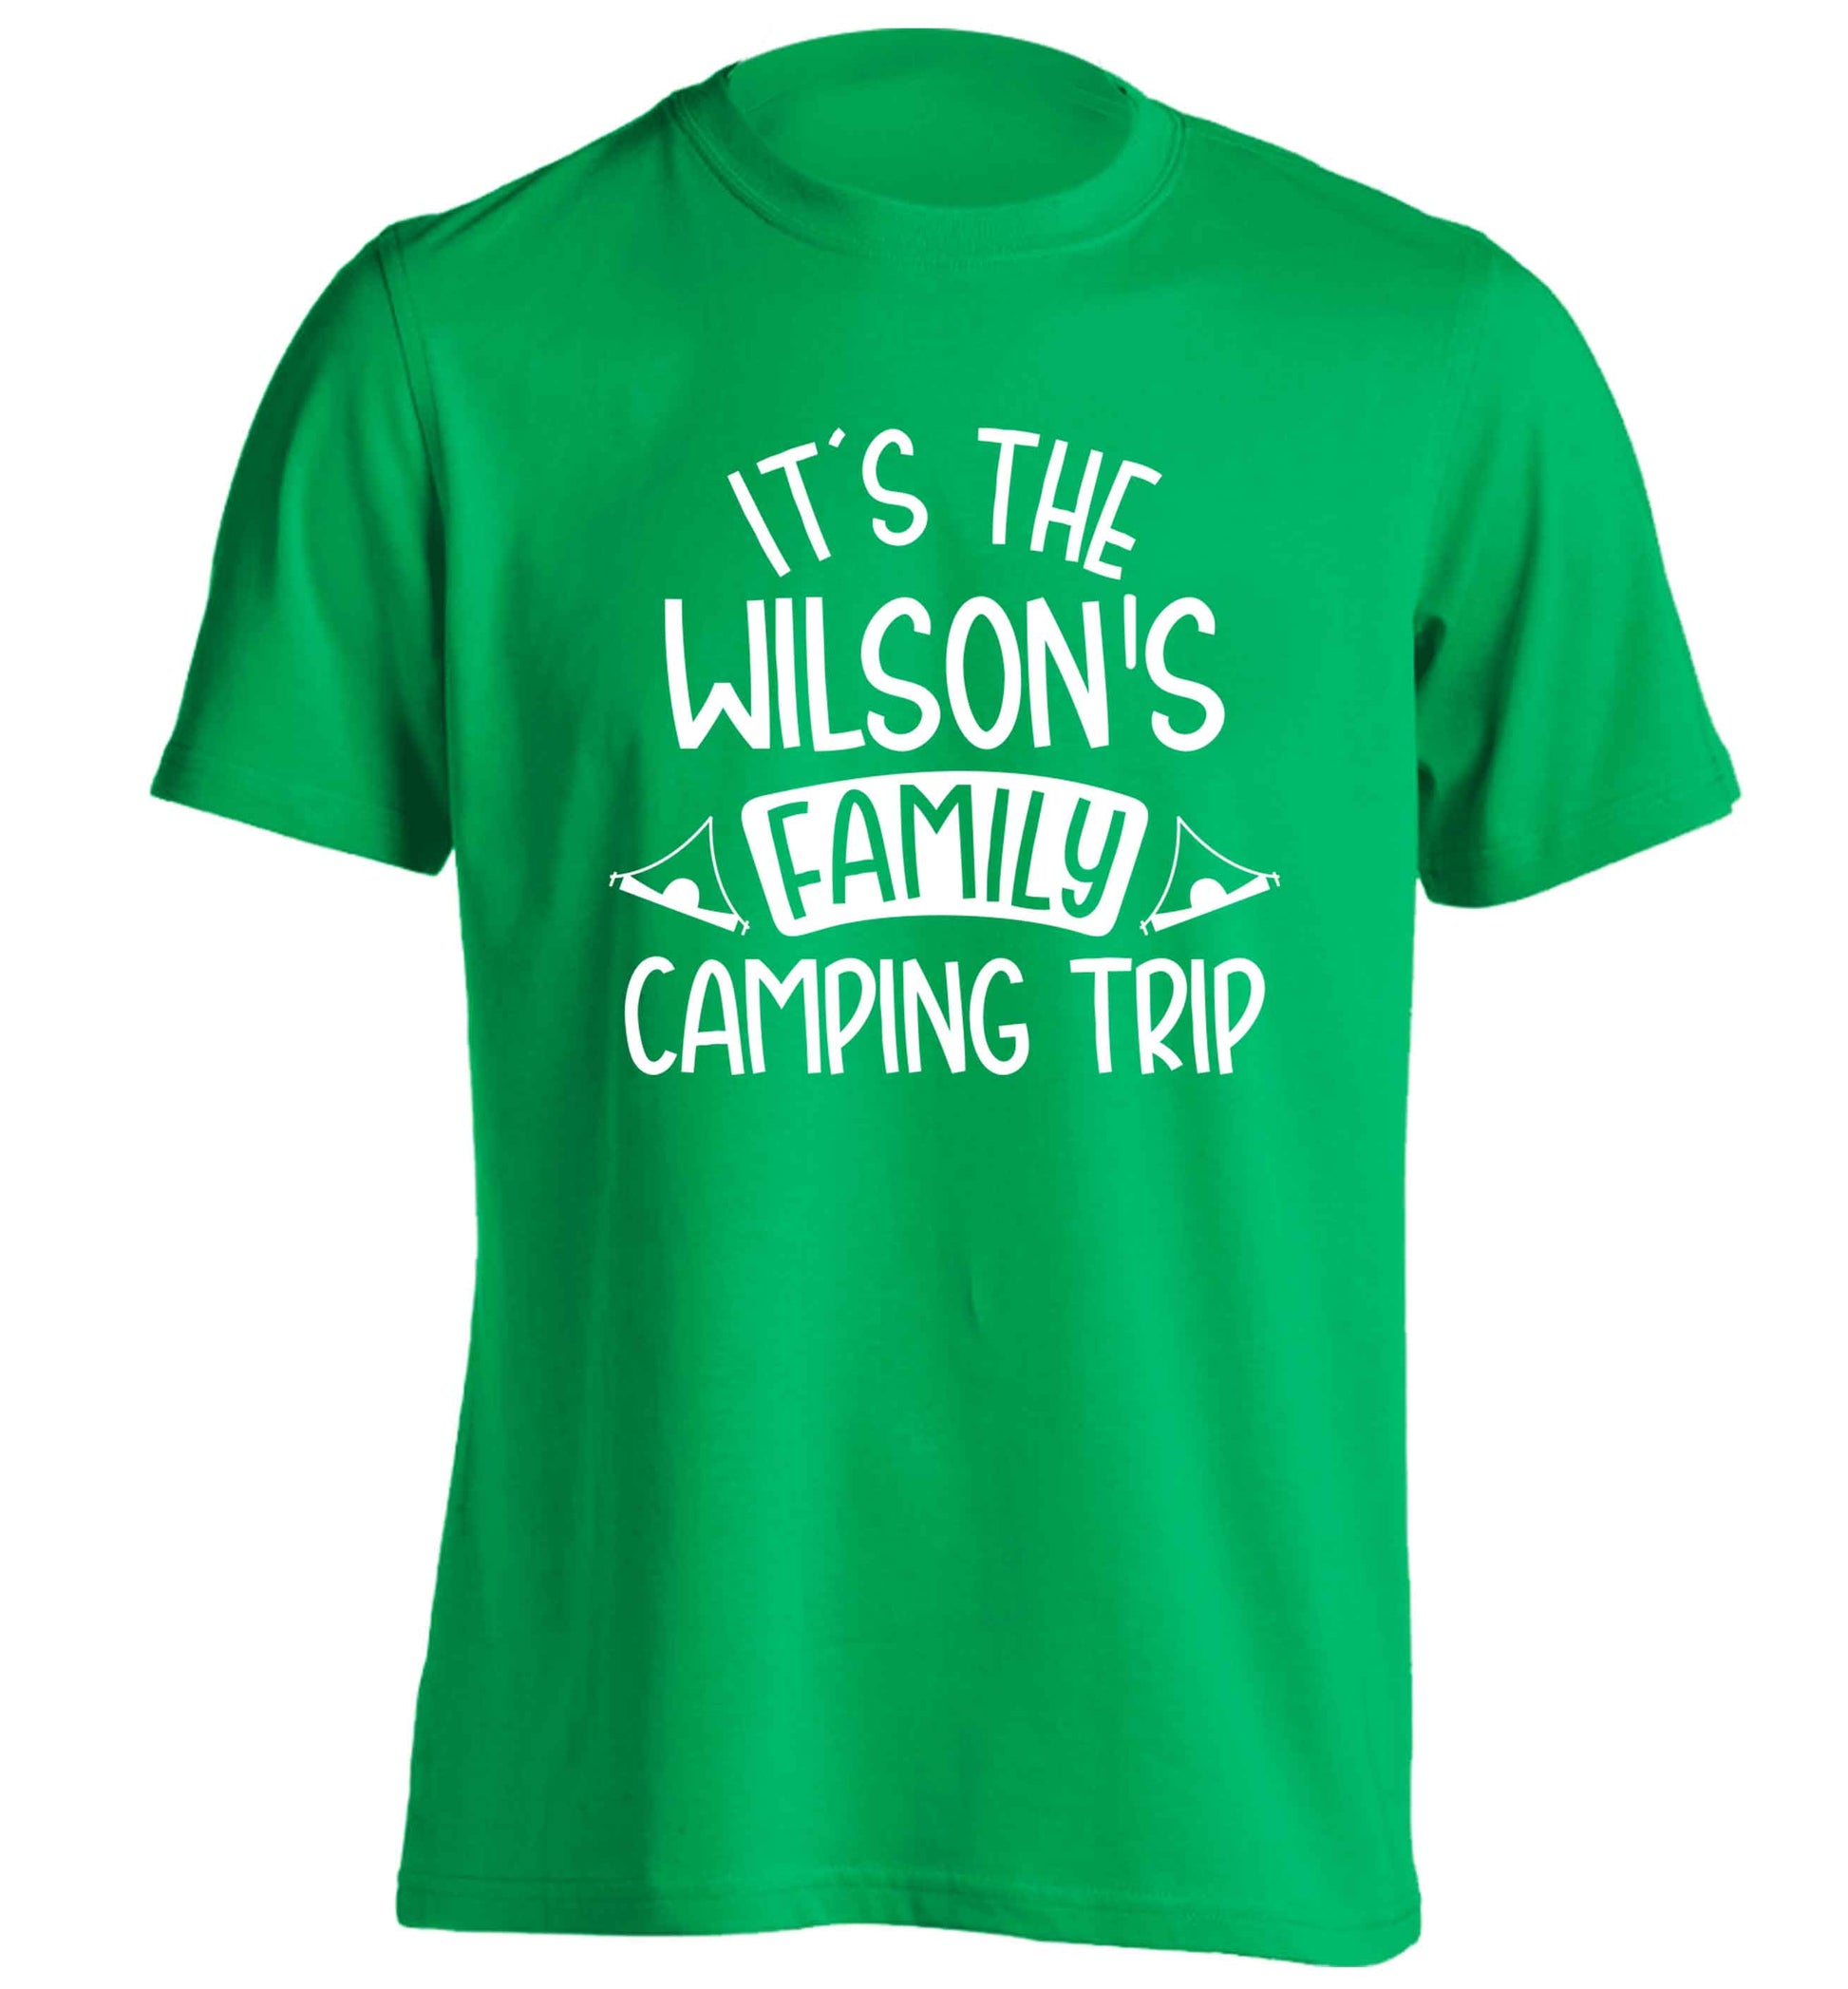 It's the Wilson's family camping trip personalised adults unisex green Tshirt 2XL